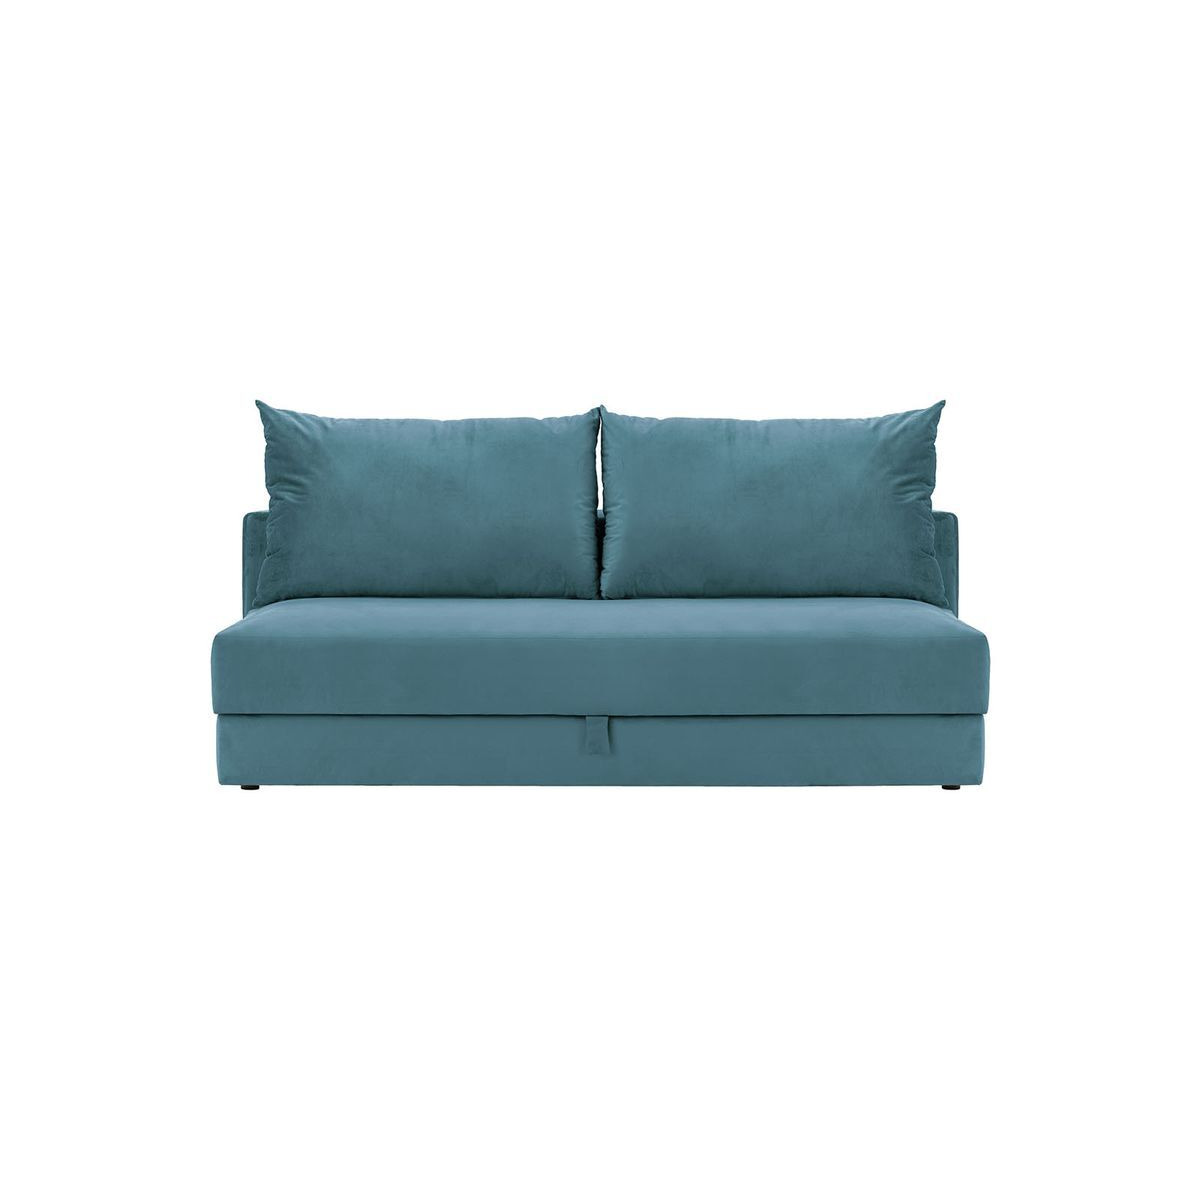 Vena 3 seater Sofa Bed, dirty blue - image 1